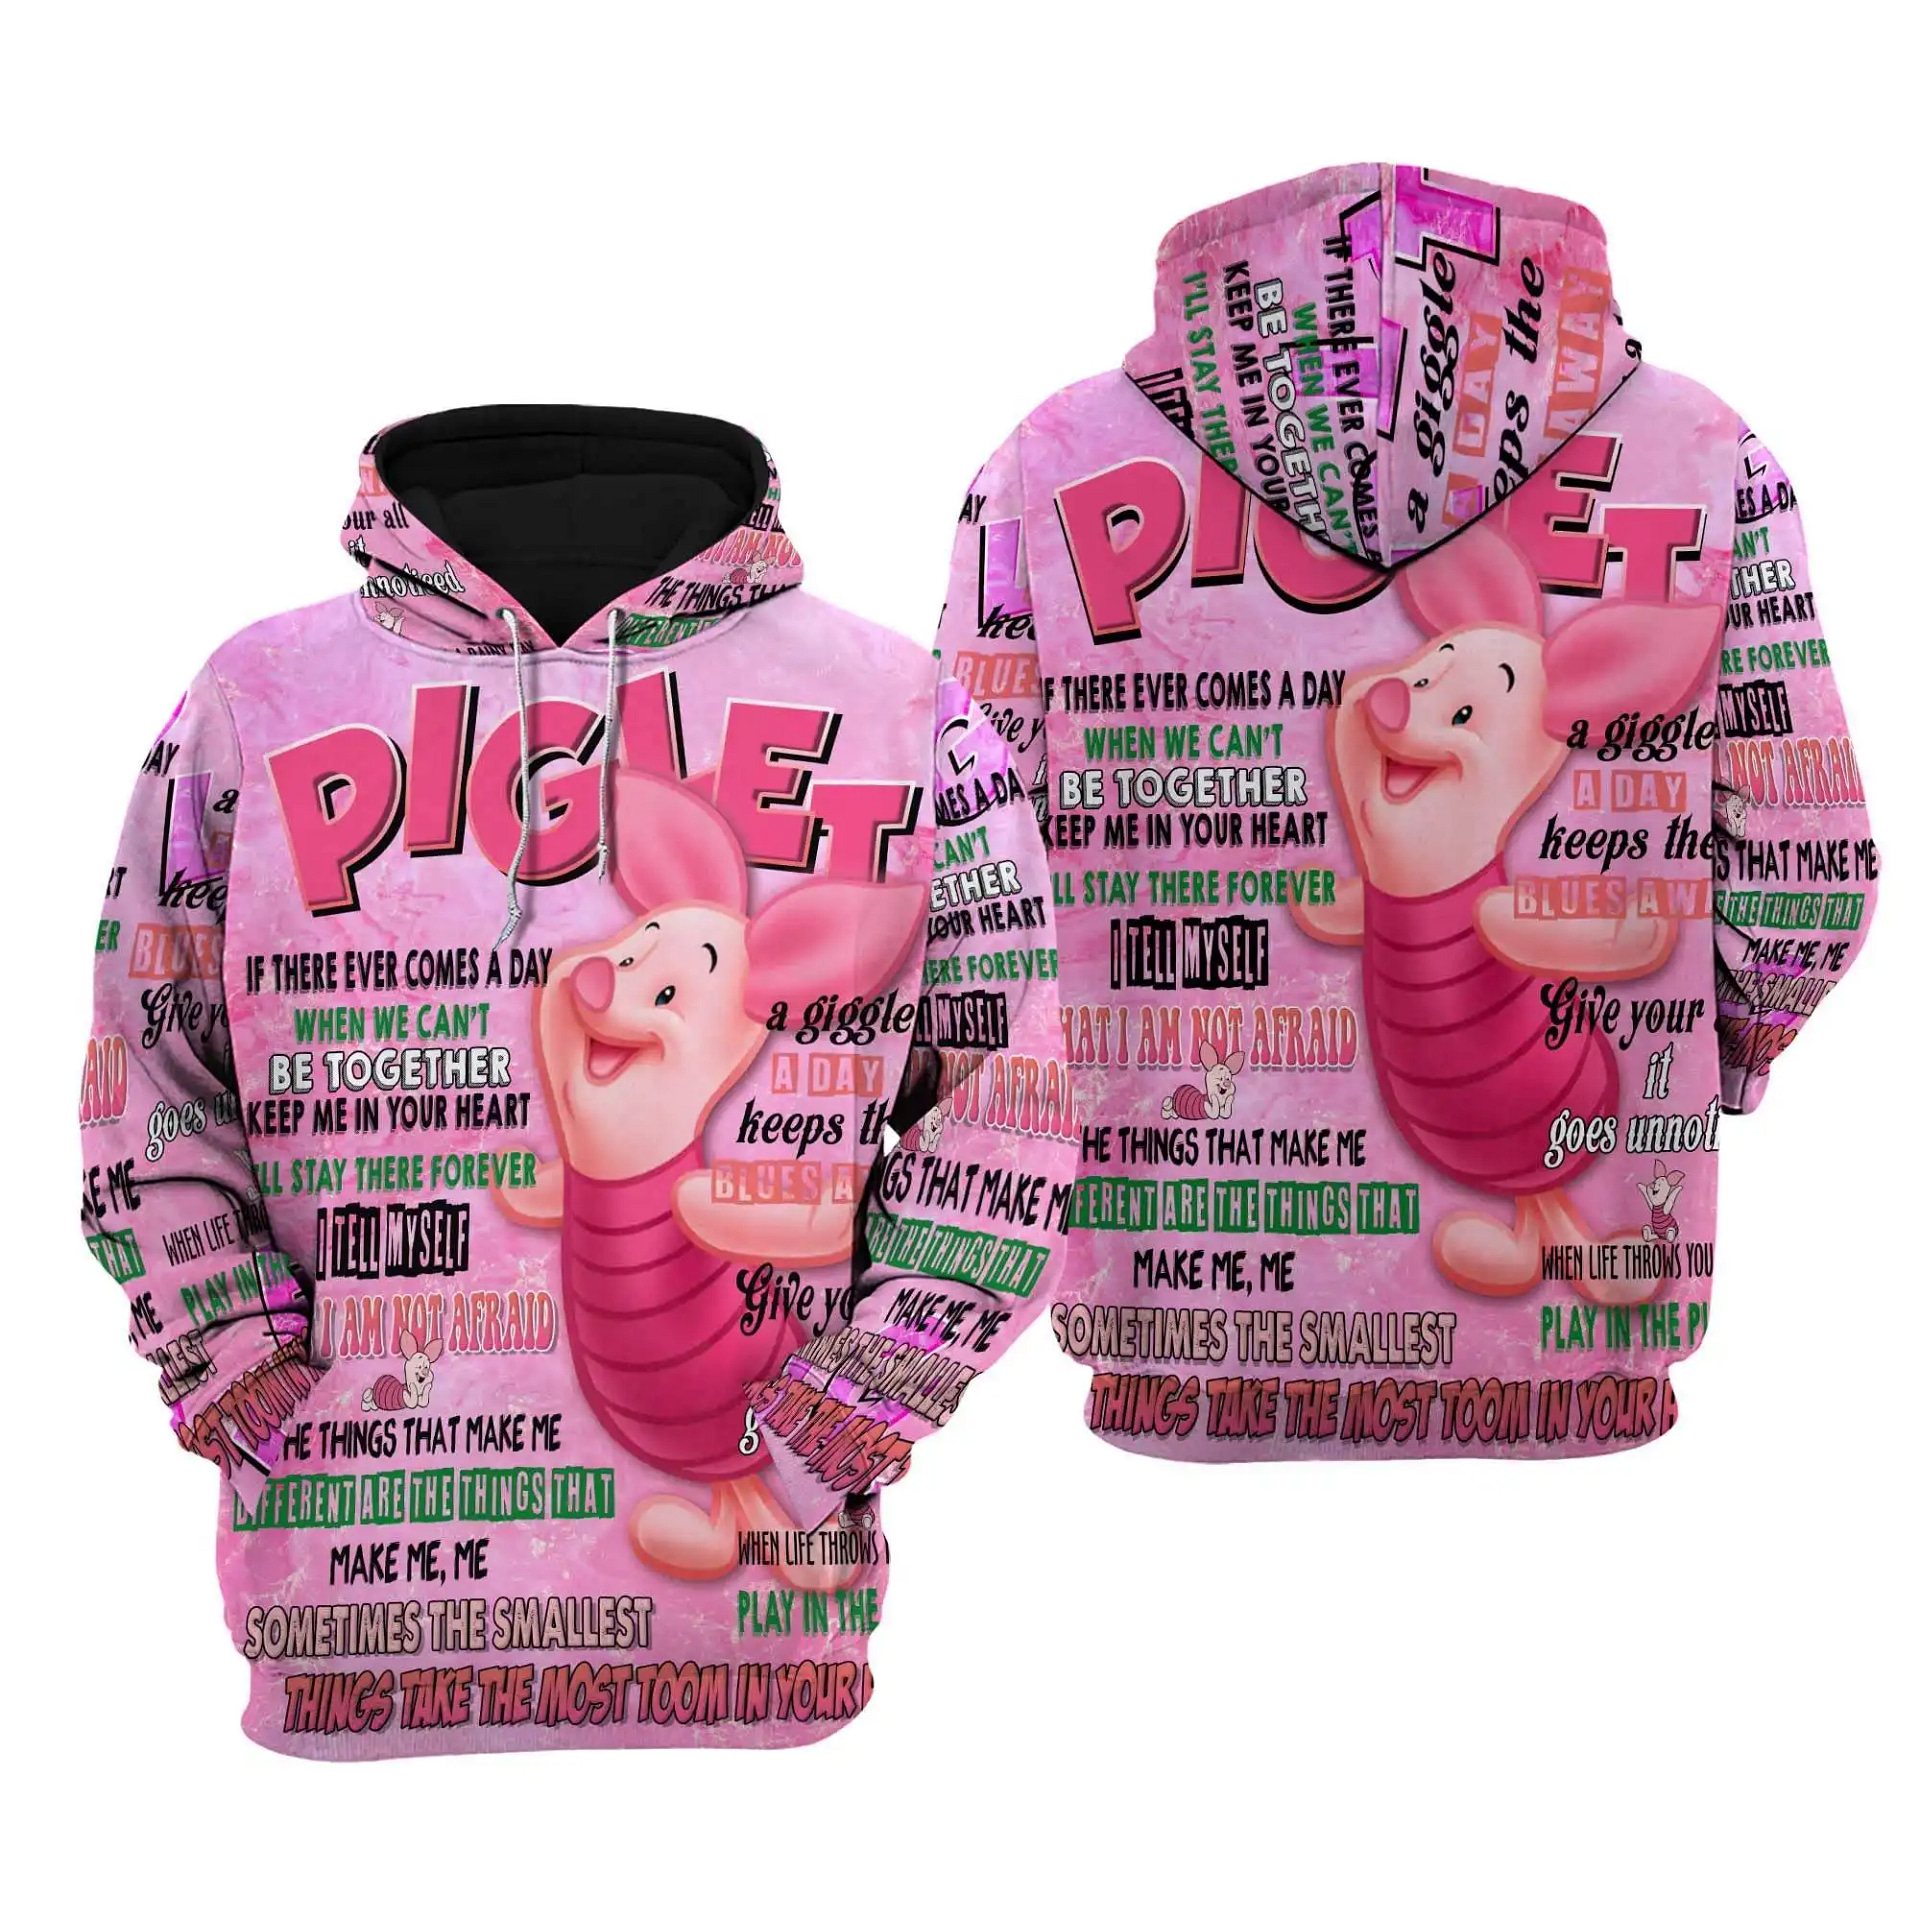 Pink Piglet Punk Words Pattern Disney Quotes Cartoon Graphic Outfits Clothing Men Women Kids Toddlers Hoodie 3D